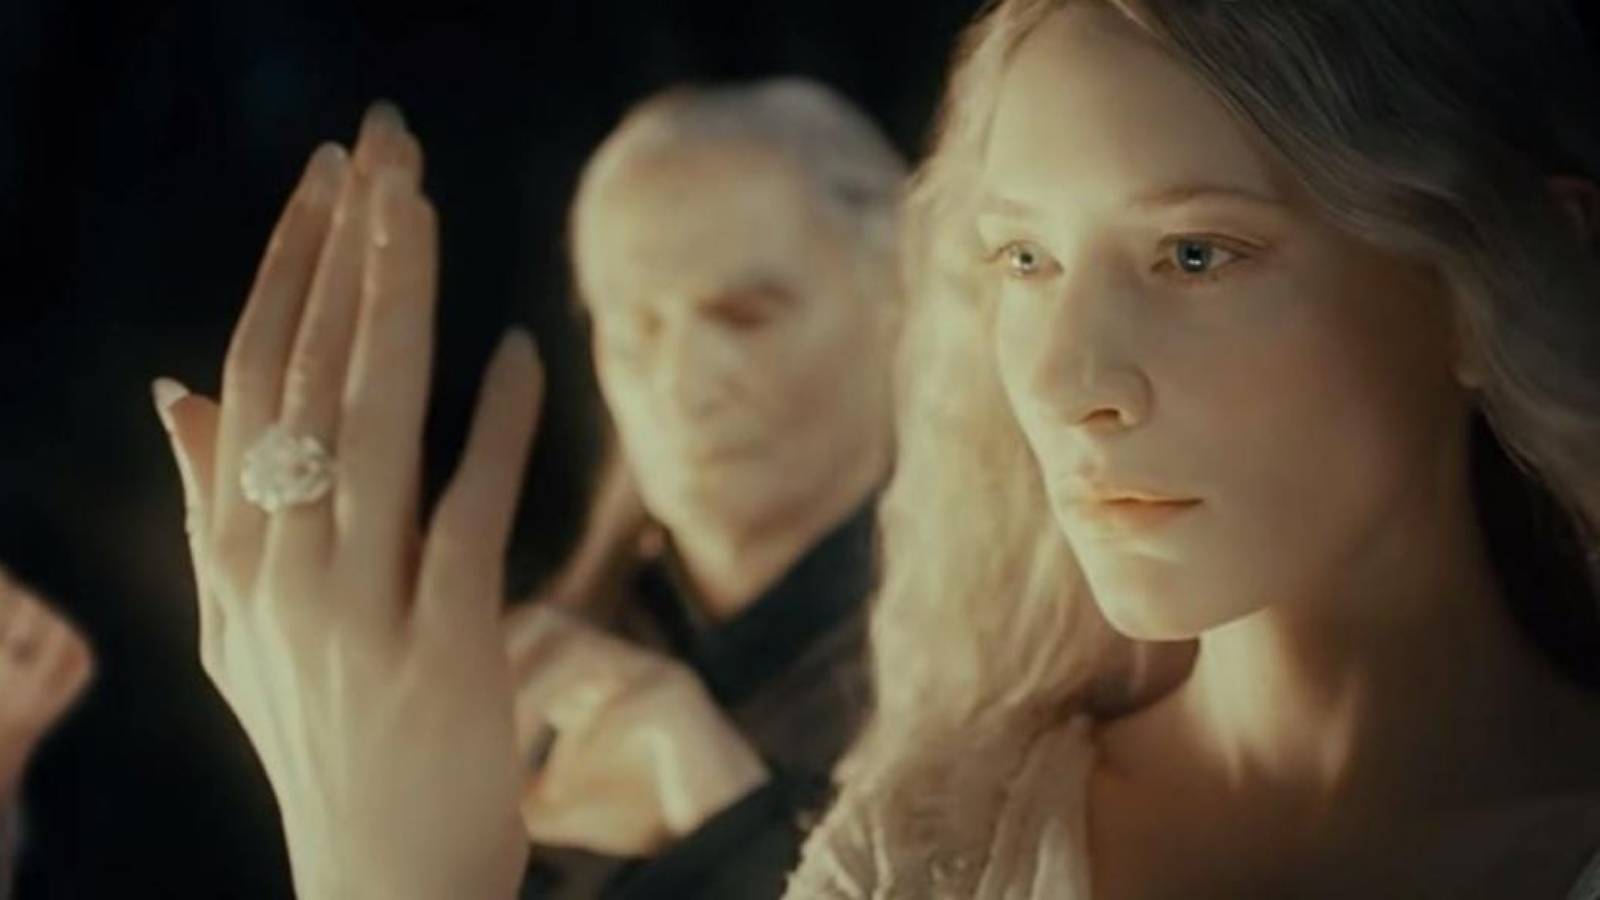 Galadriel, who is an elf